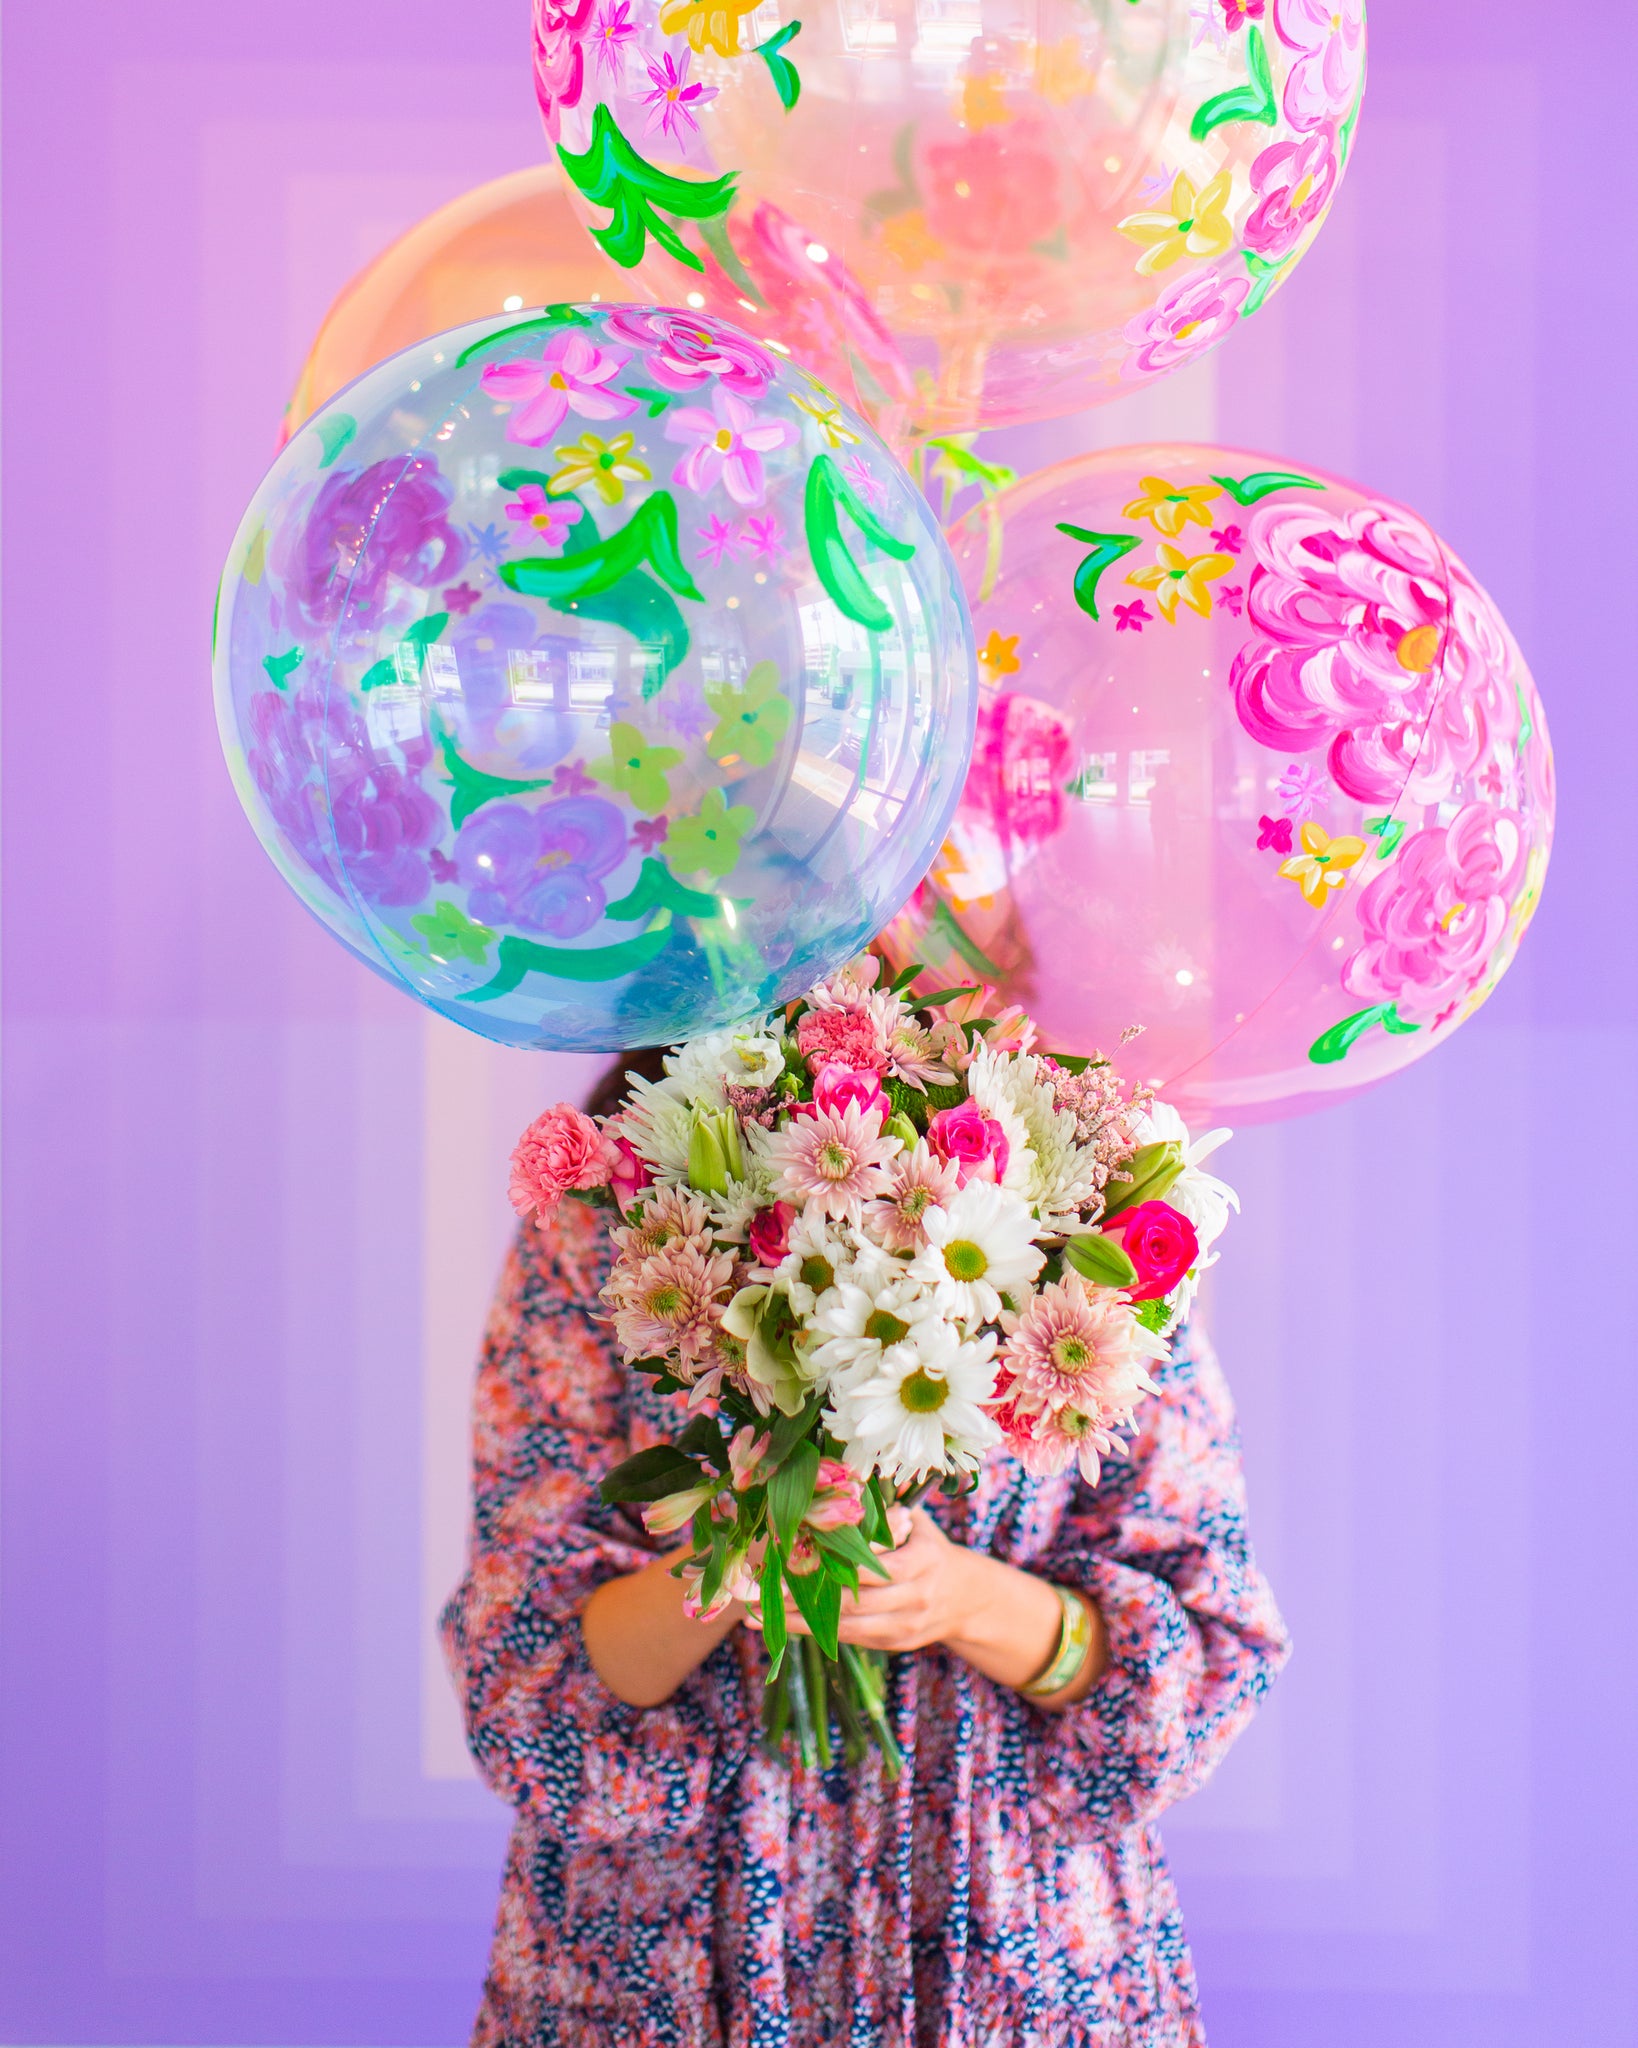 Hand painted floral balloons by Revelry Goods in Houston, TX